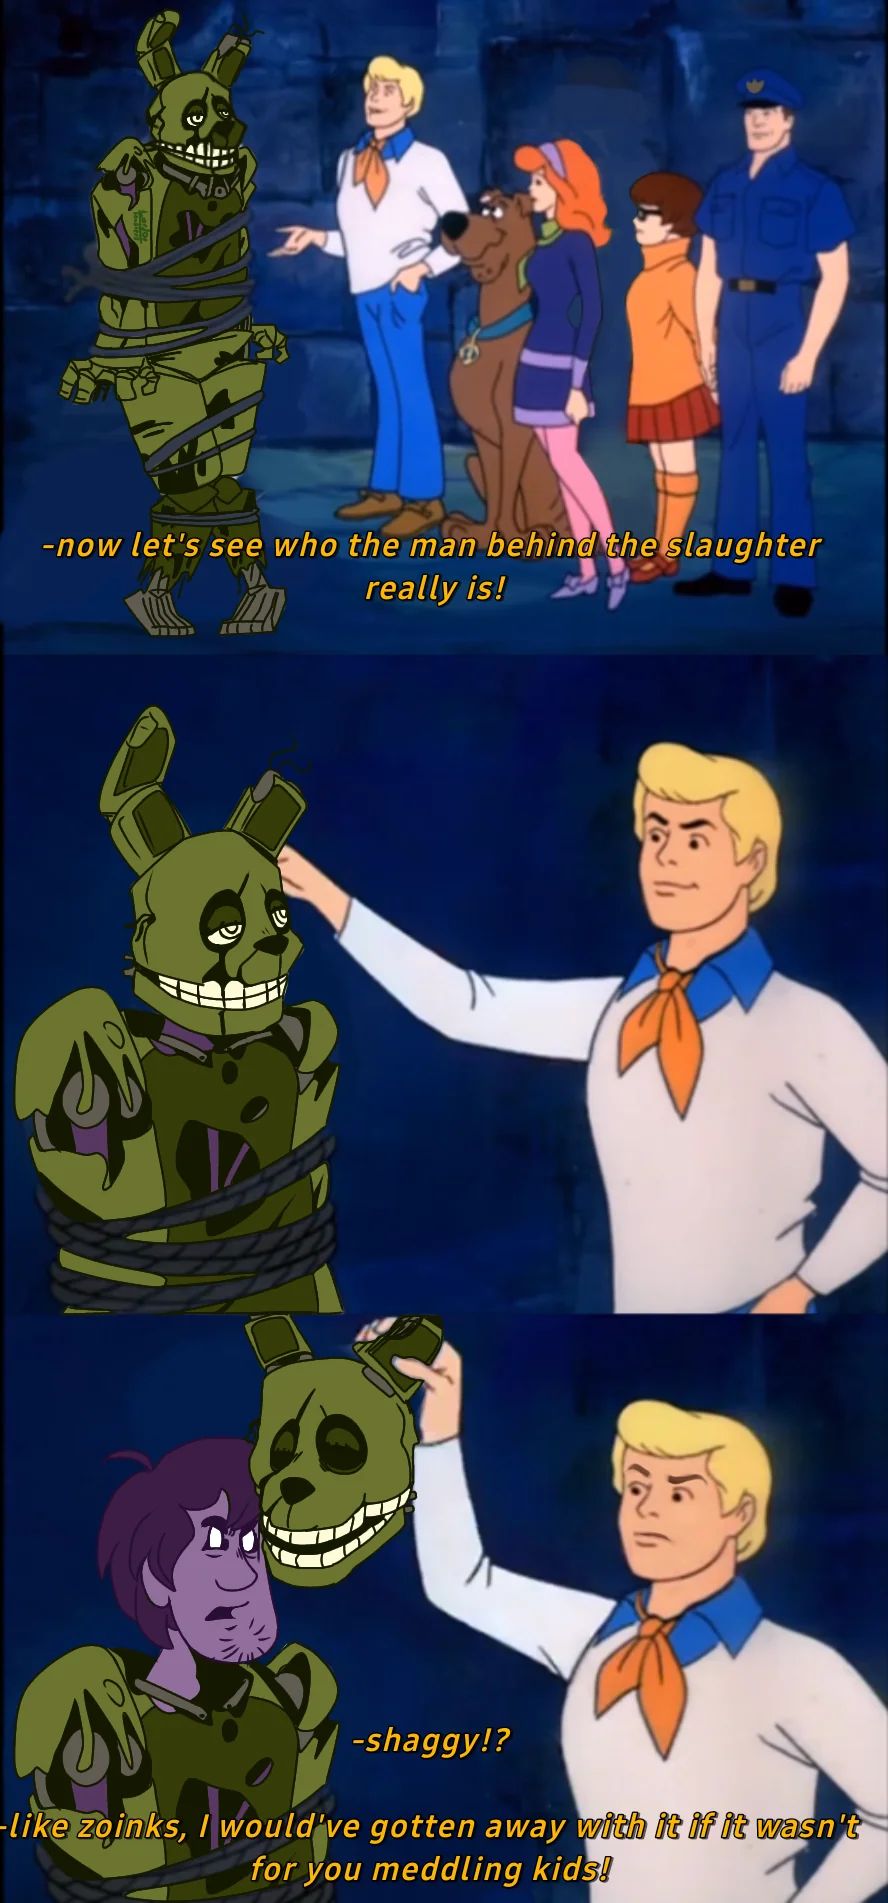 -now let's see who the man behind the slaughter
really is!
-shaggy!?
19
-like zoinks, I would've gotten away with it if it wasn't
for you meddling kids!